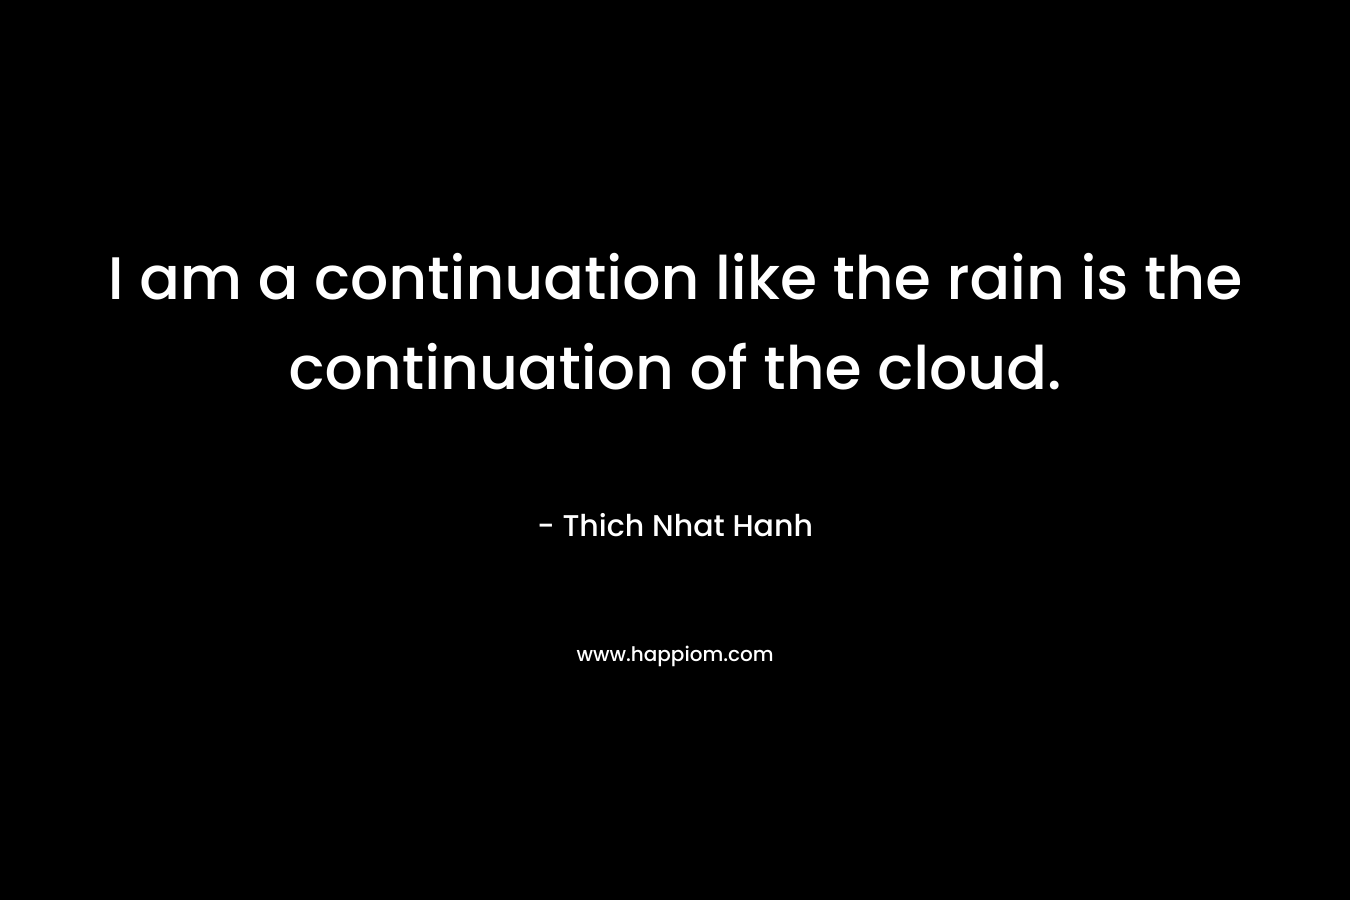 I am a continuation like the rain is the continuation of the cloud.